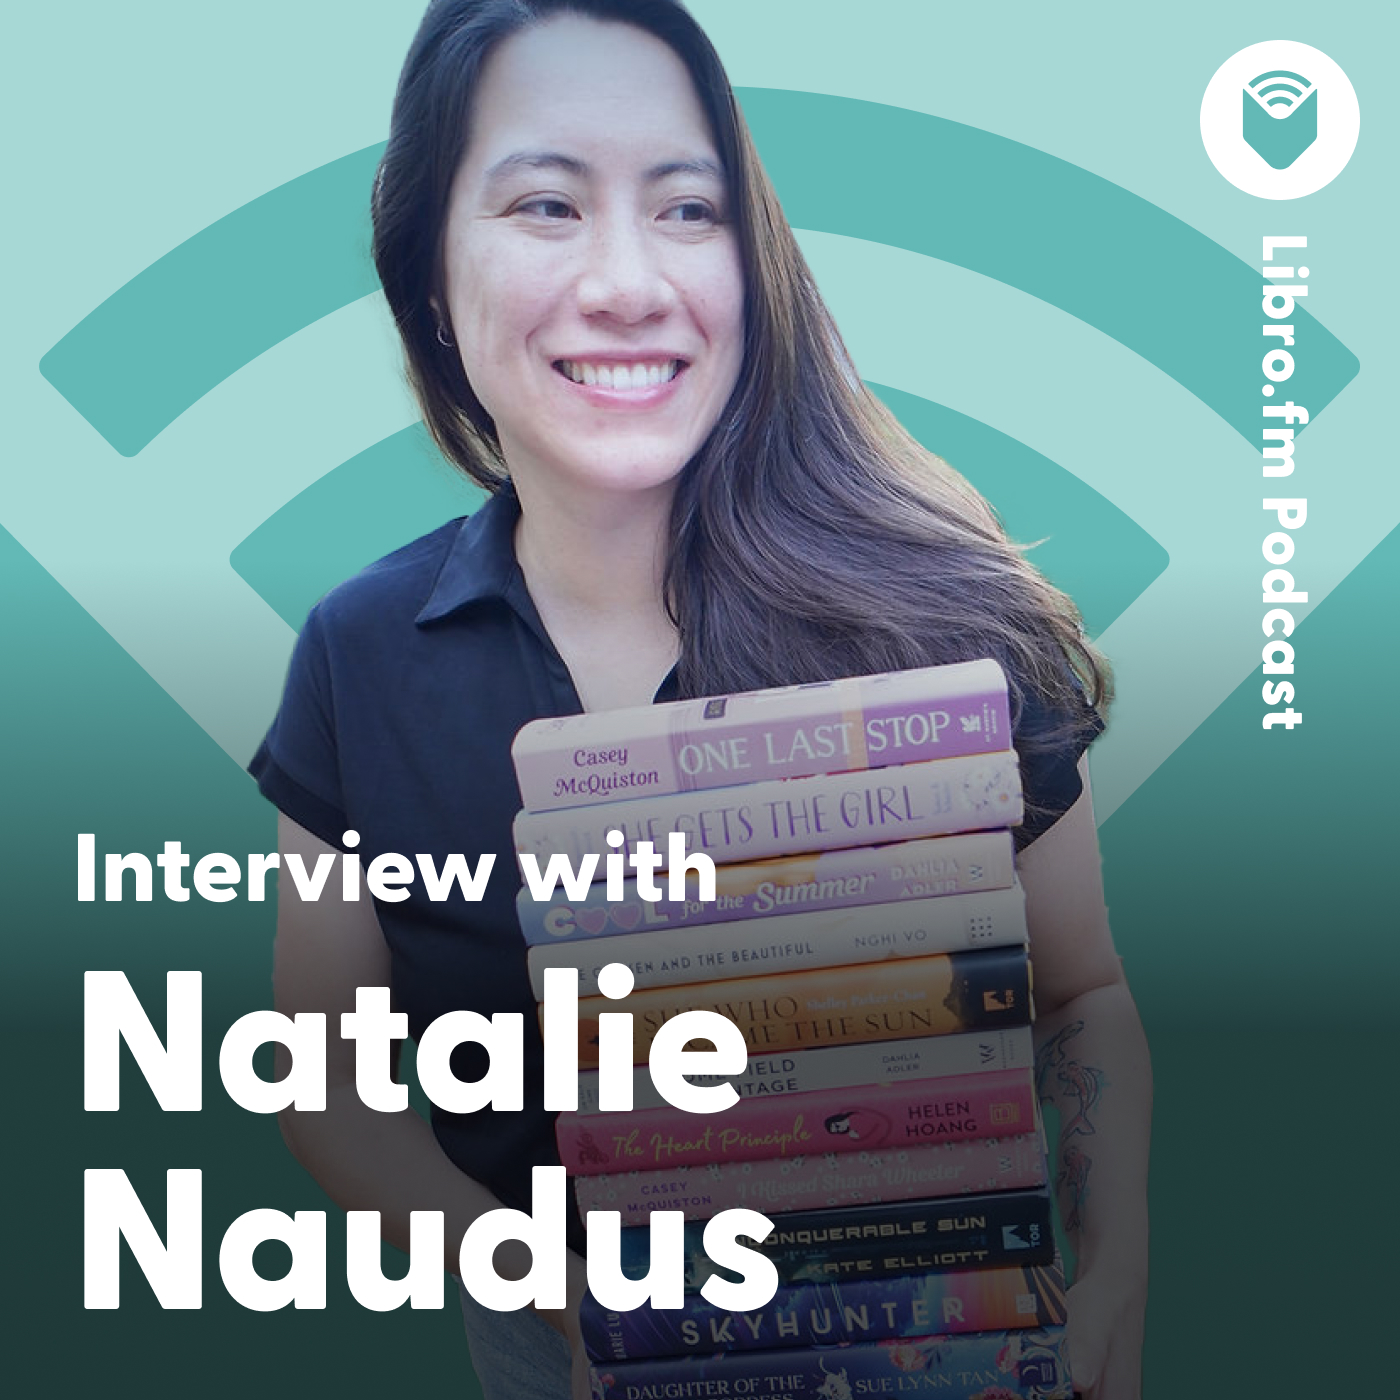 A headshot of Natalie Naudus on a teal background showing the Libro.fm logo. Text reads: “Libro.fm Podcast: Interview with Natalie Naudus."